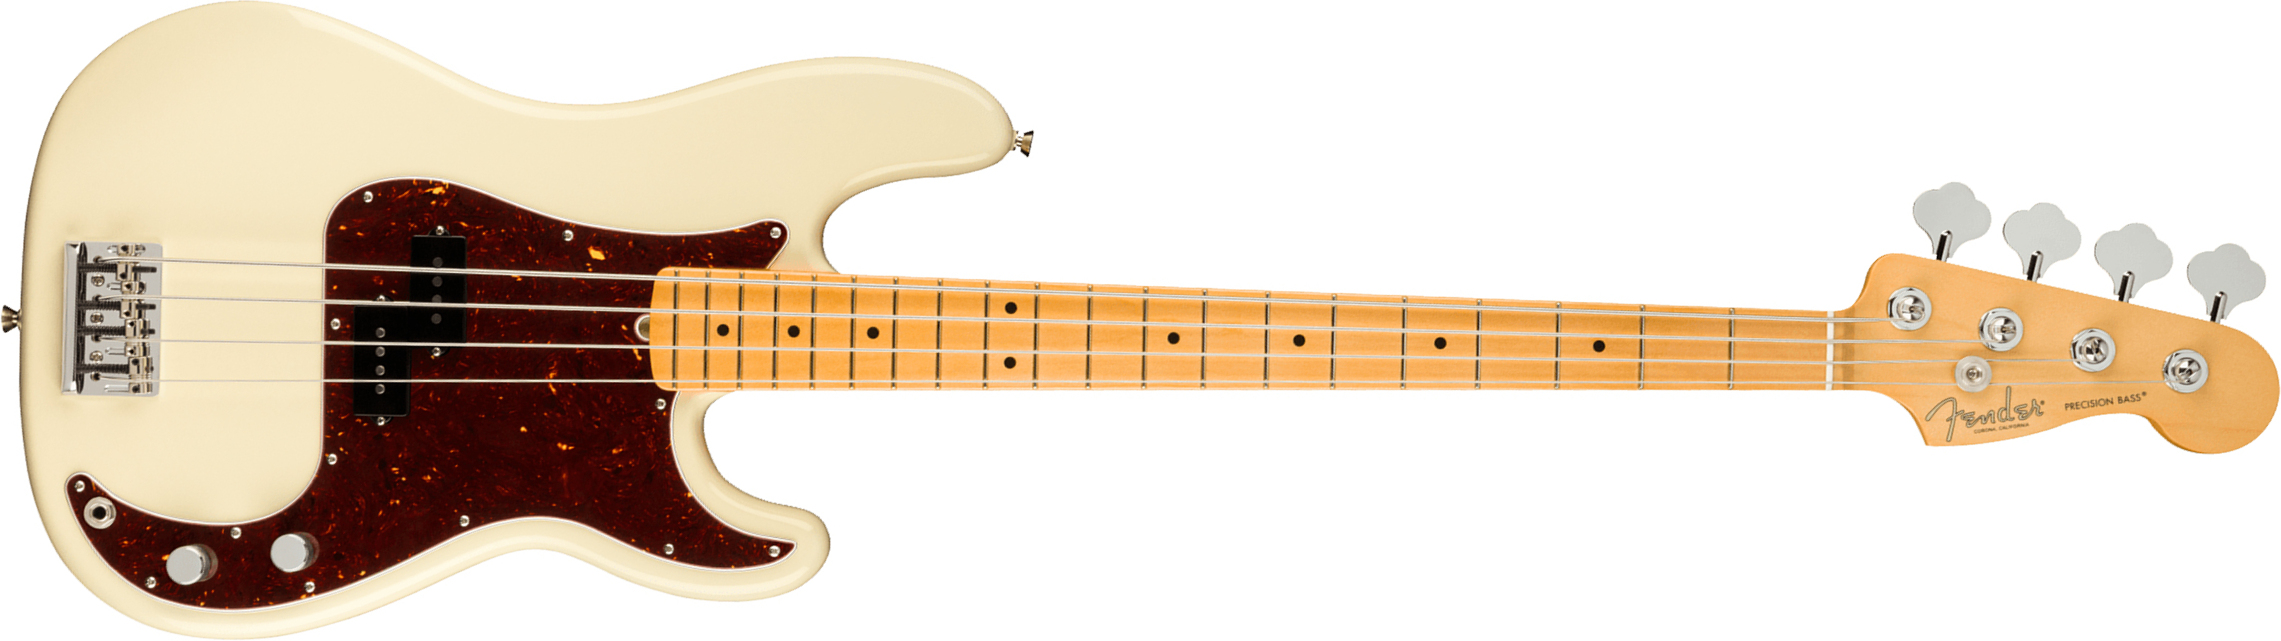 Fender Precision Bass American Professional Ii Usa Mn - Olympic White - Basse Électrique Solid Body - Main picture